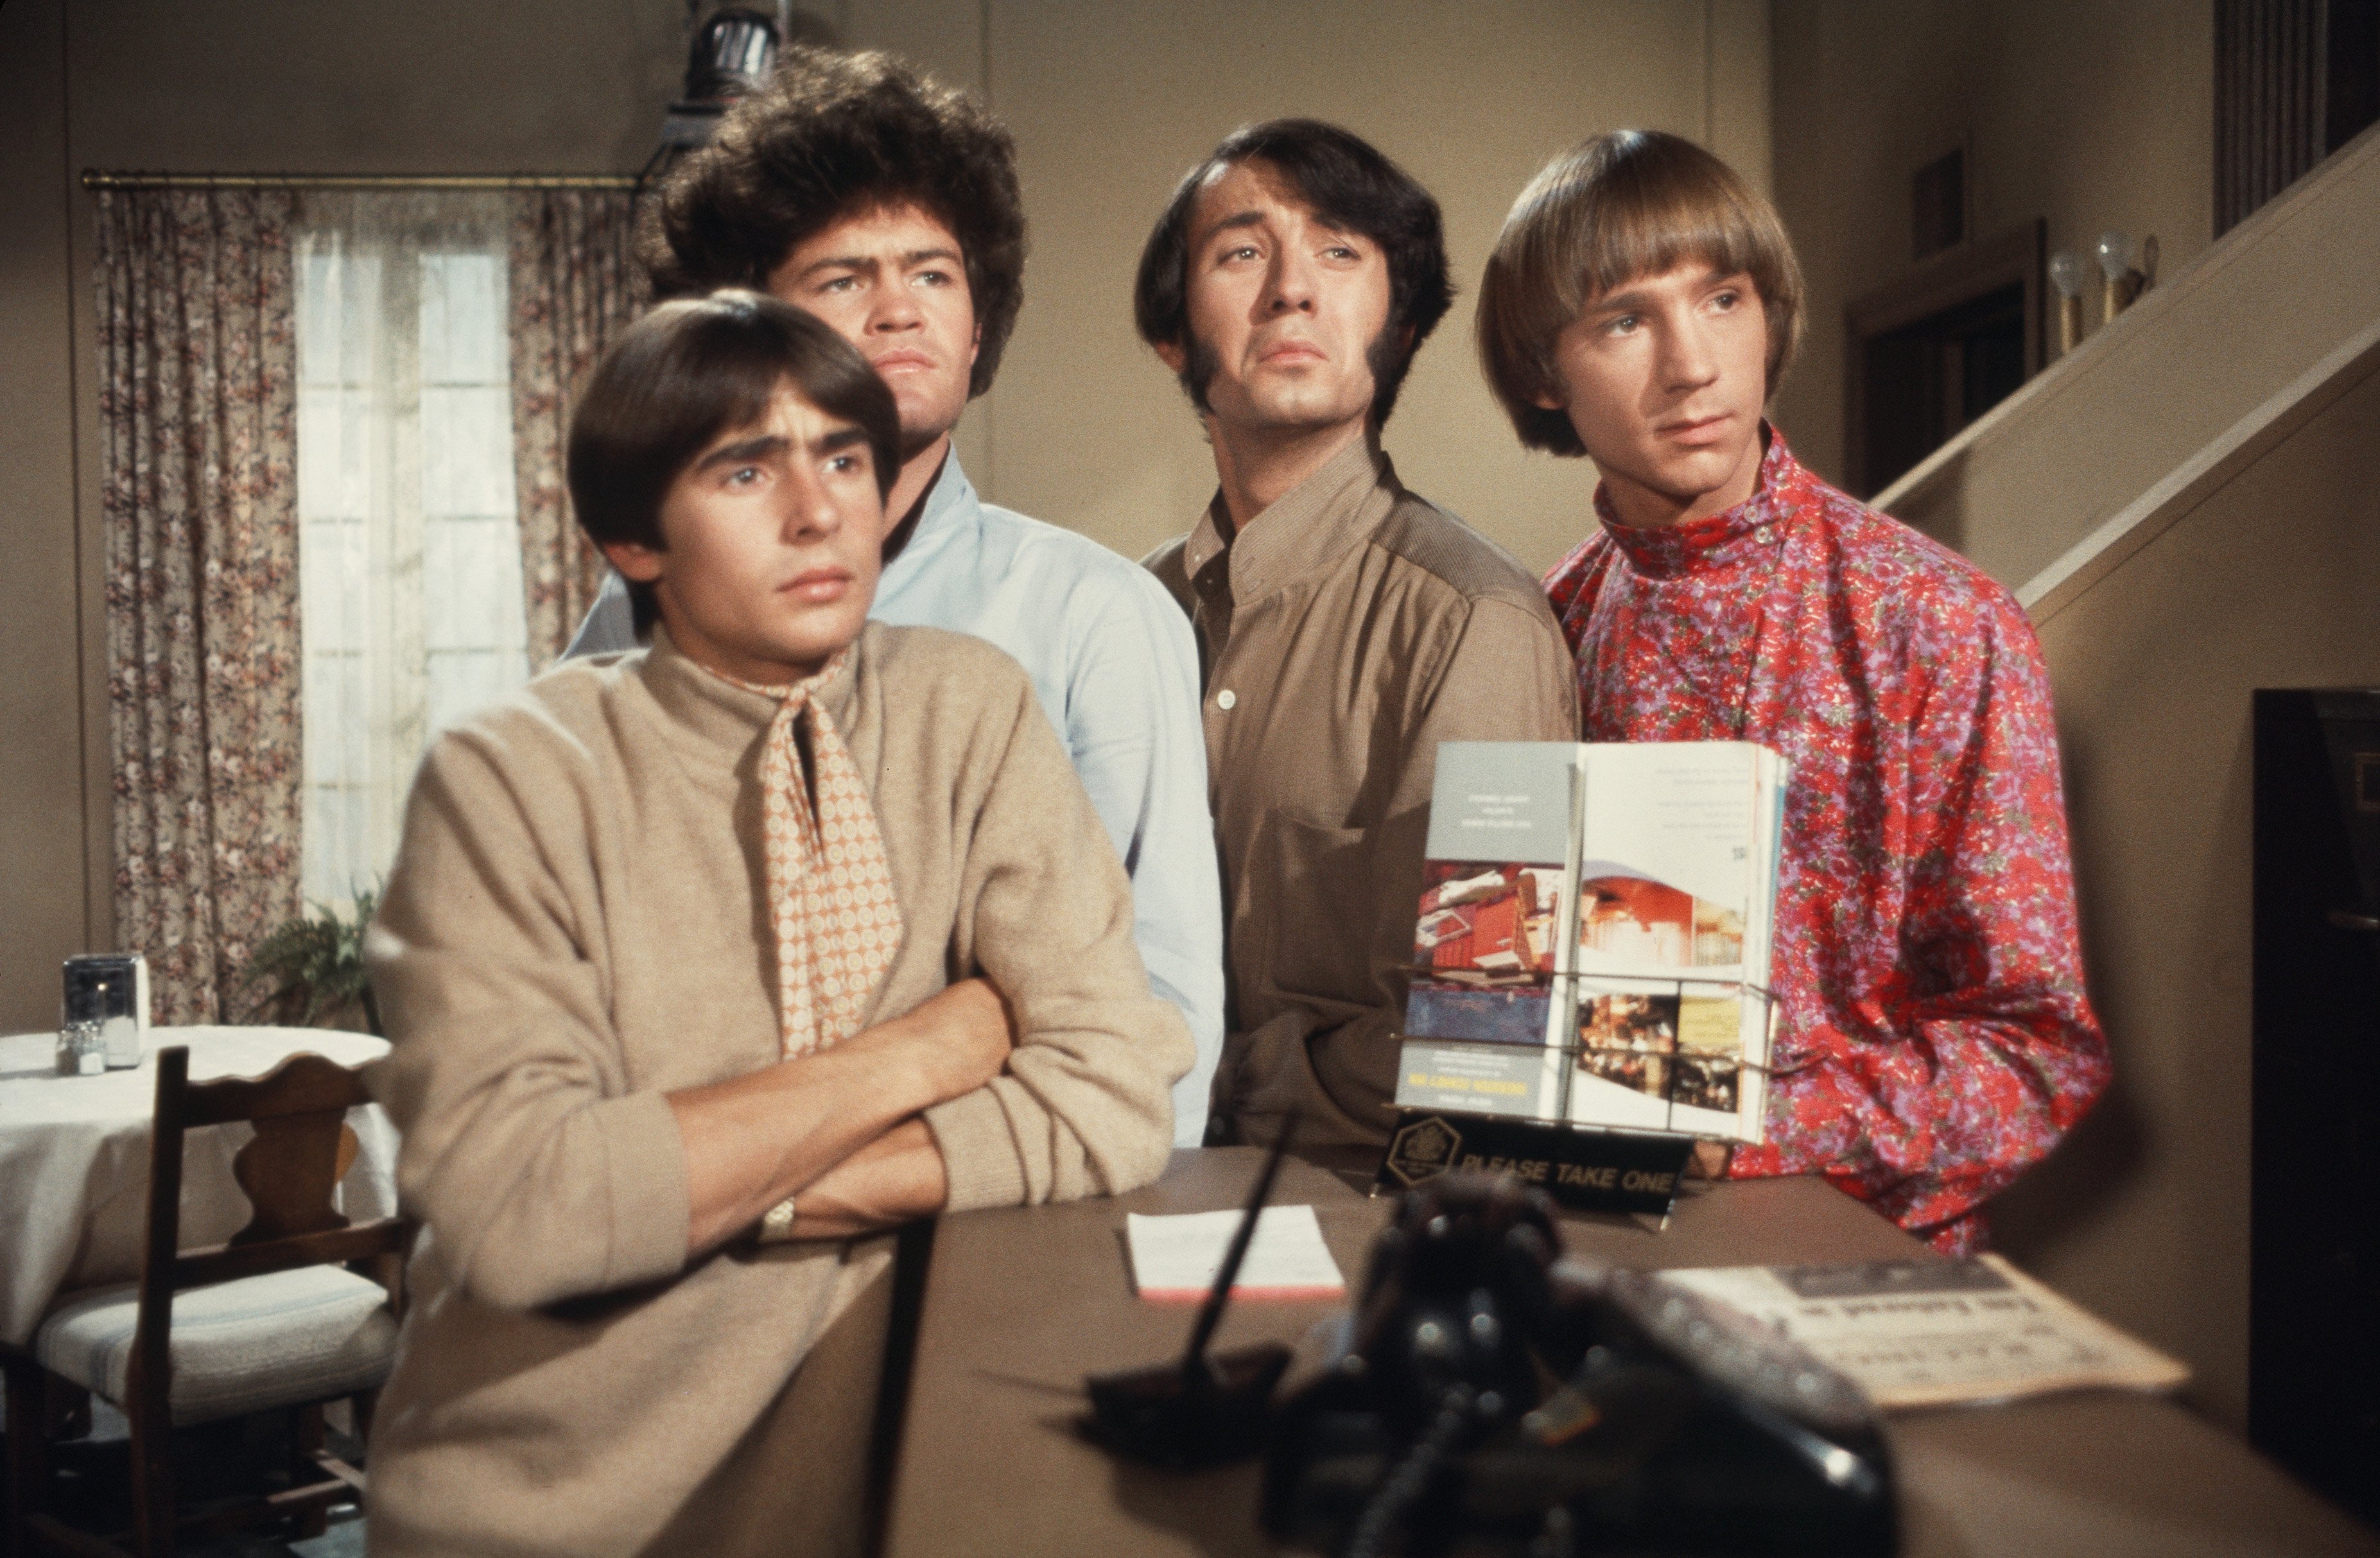 The Monkees' Davy Jones, Mickey Dolenz, Peter Tork, and Mike Nesmith at a piano